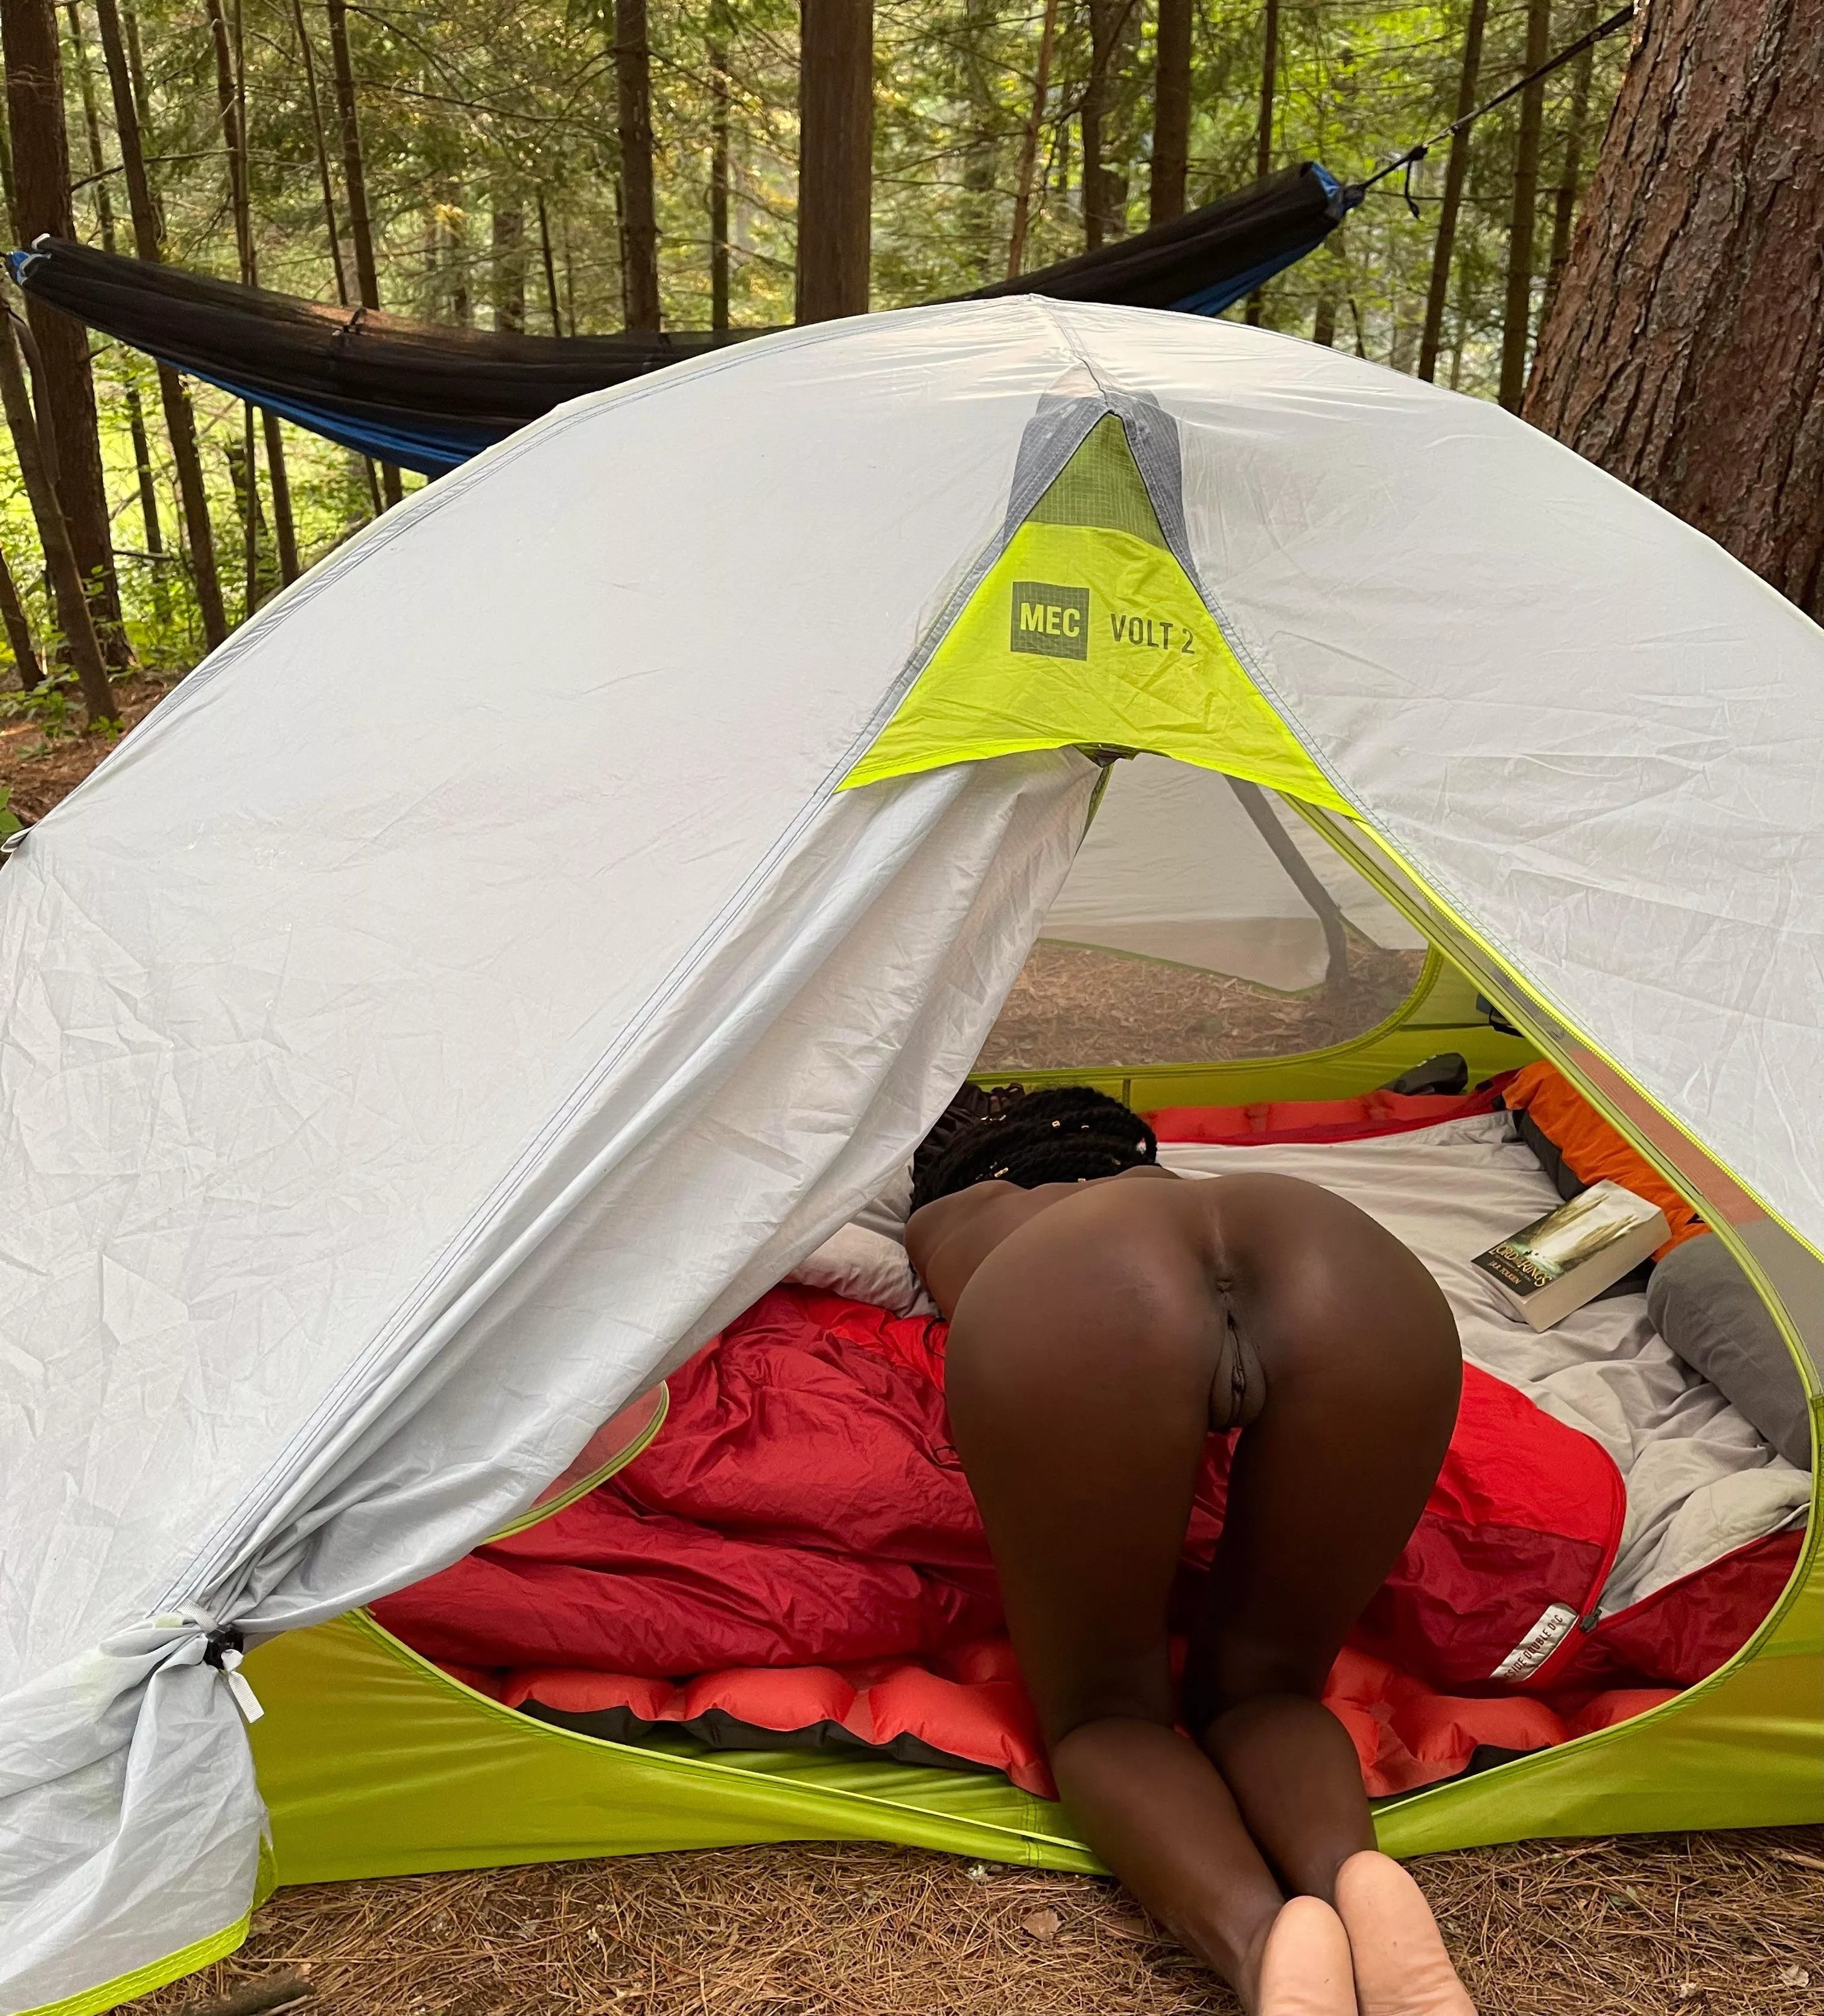 I love being face down and ass up anywhere. Even when I'm camping out in  the woods. I'm always ready to take cock ðŸ˜œ nudes | GLAMOURHOUND.COM